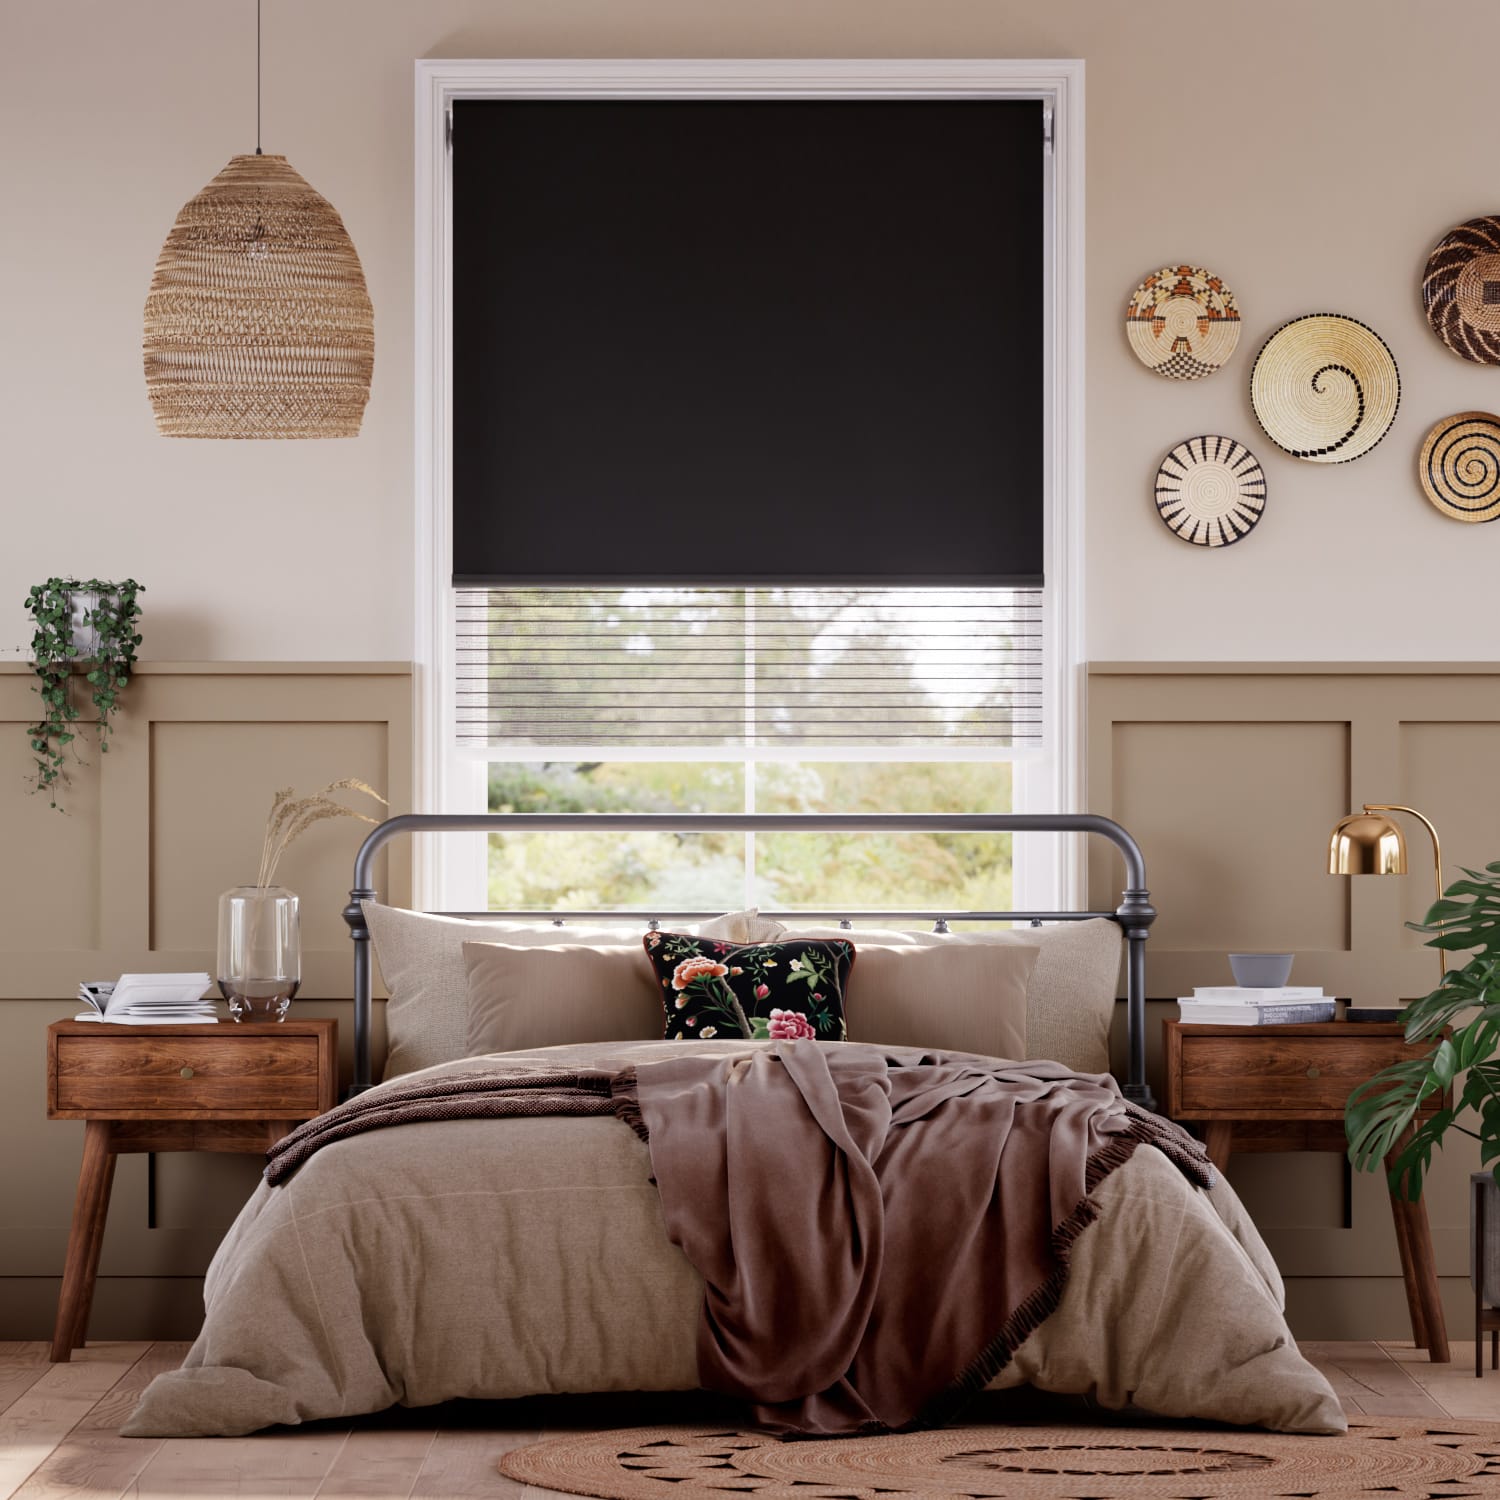 Alia Pitch Black Double Roller Blind